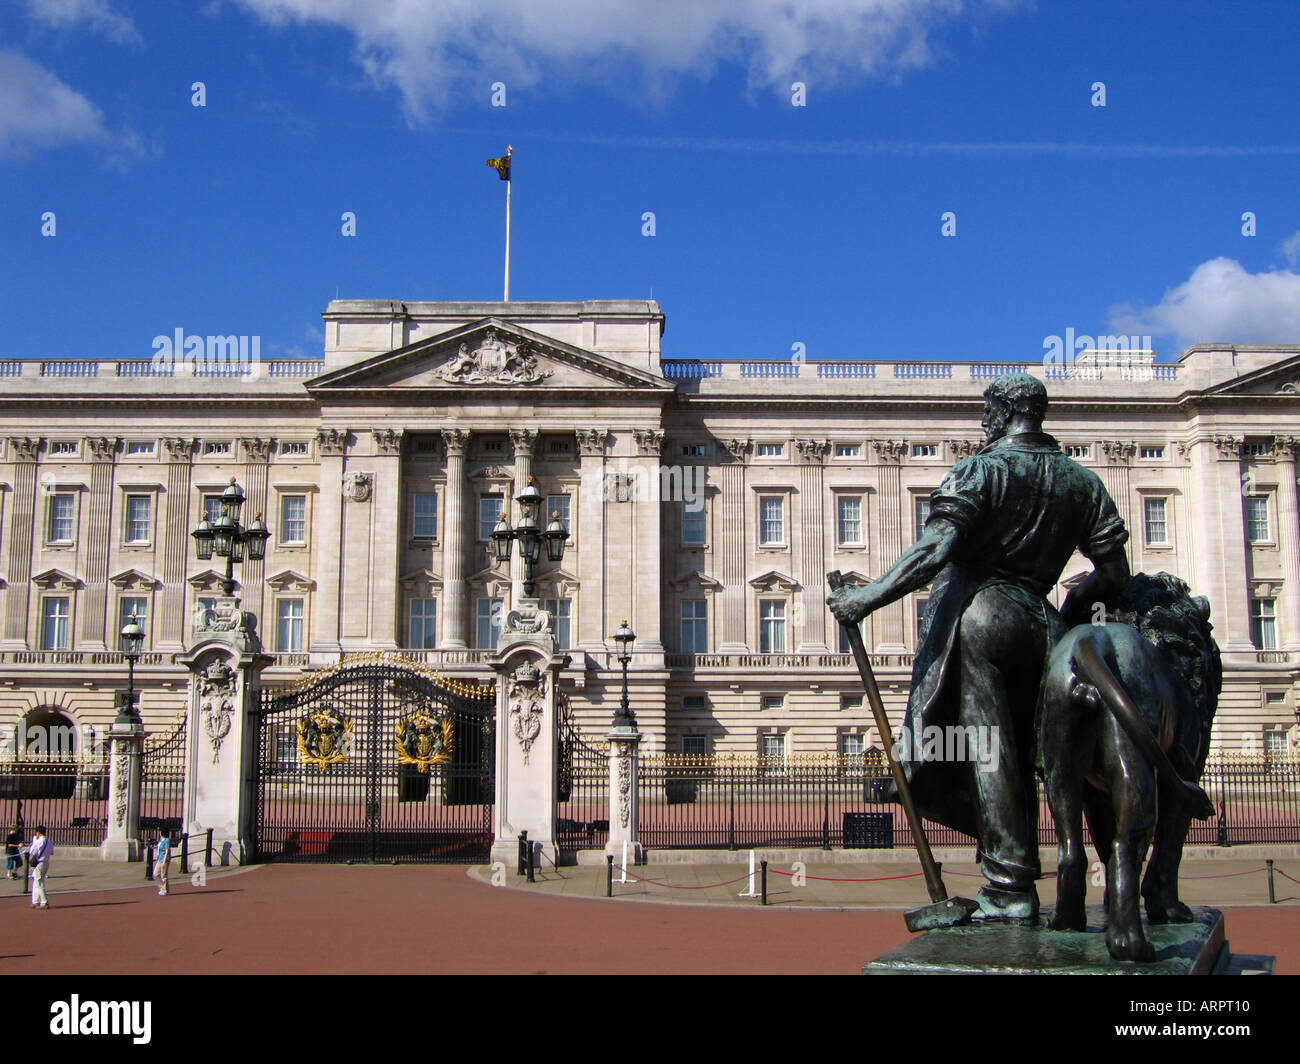 Statue and main gate Buckingham Palace City of Westminster Central London England Great Britain United Kingdom Europe Stock Photo